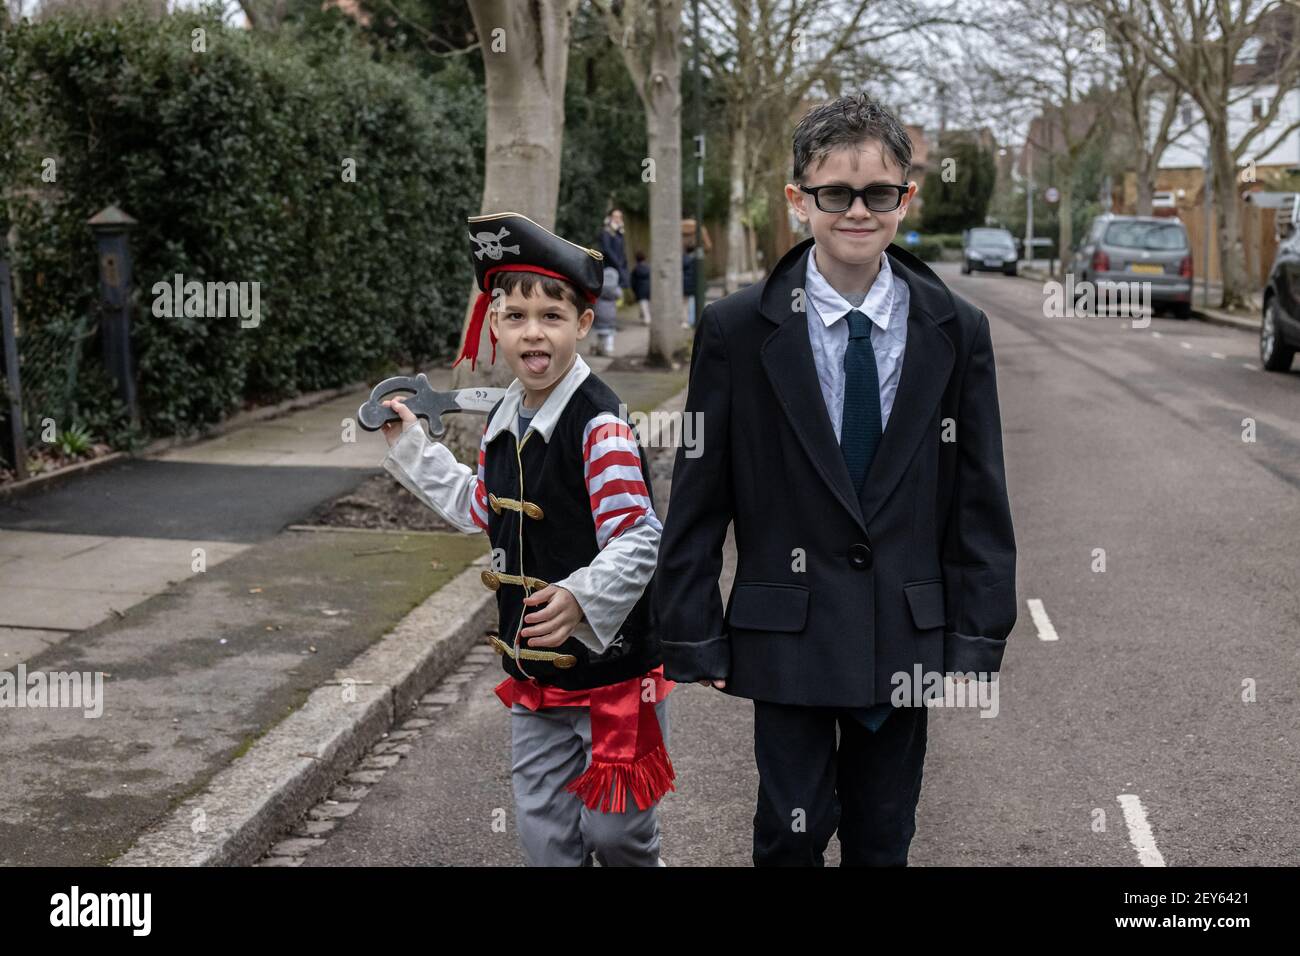 Primary school boys dressed in costume for World Book Day, London, England, UK Stock Photo